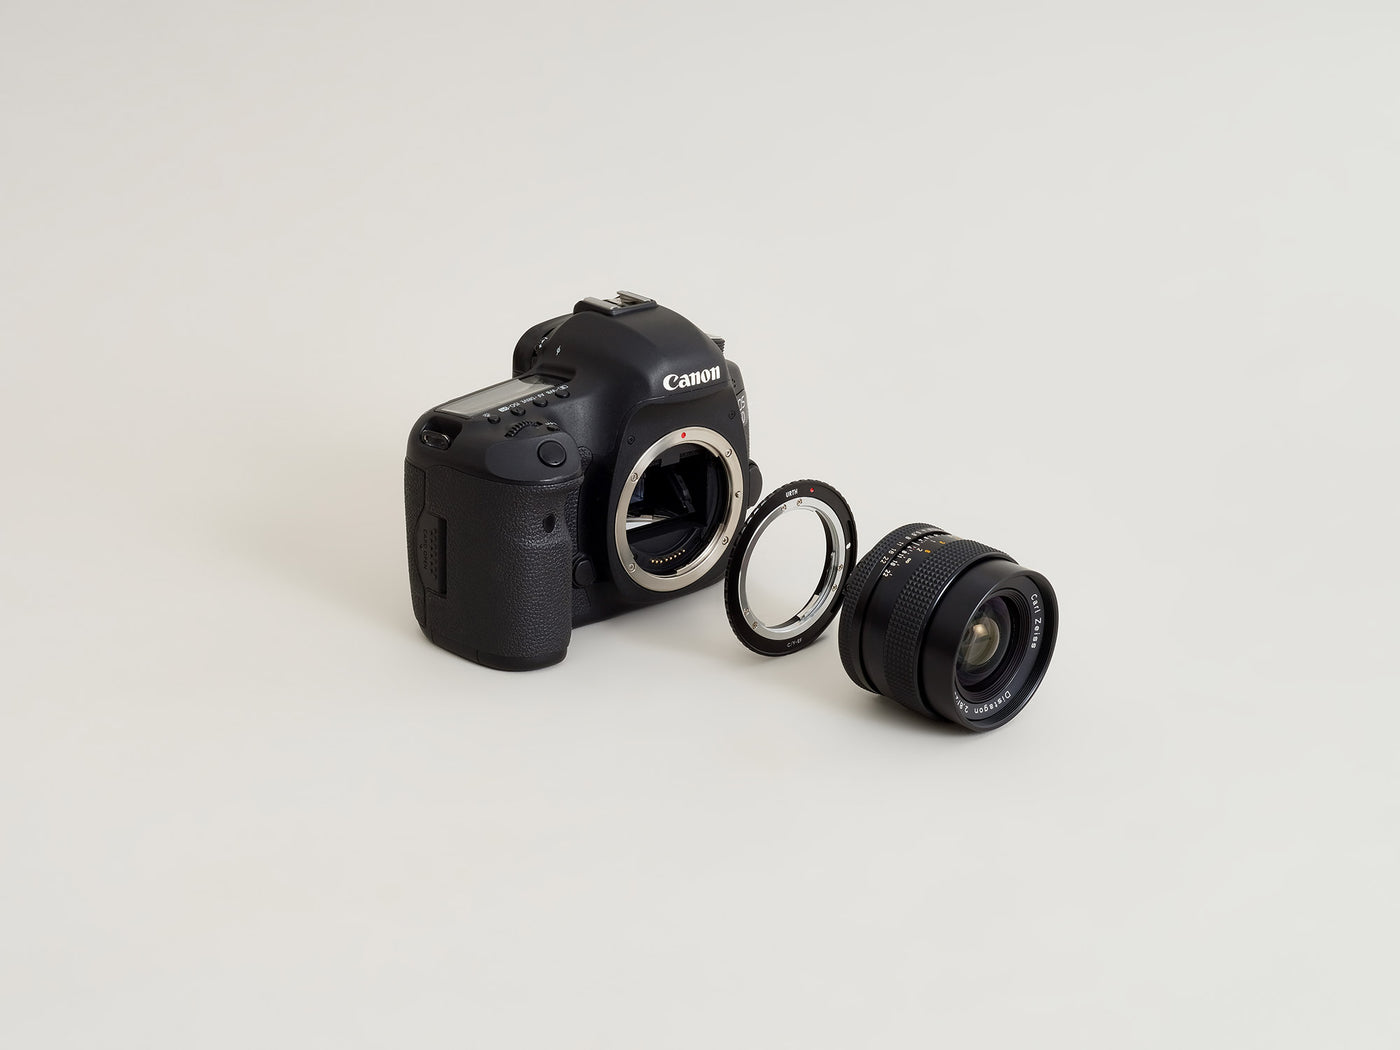 Contax/Yashica (C/Y) Lens Mount to Canon (EF/EF-S) Camera Mount